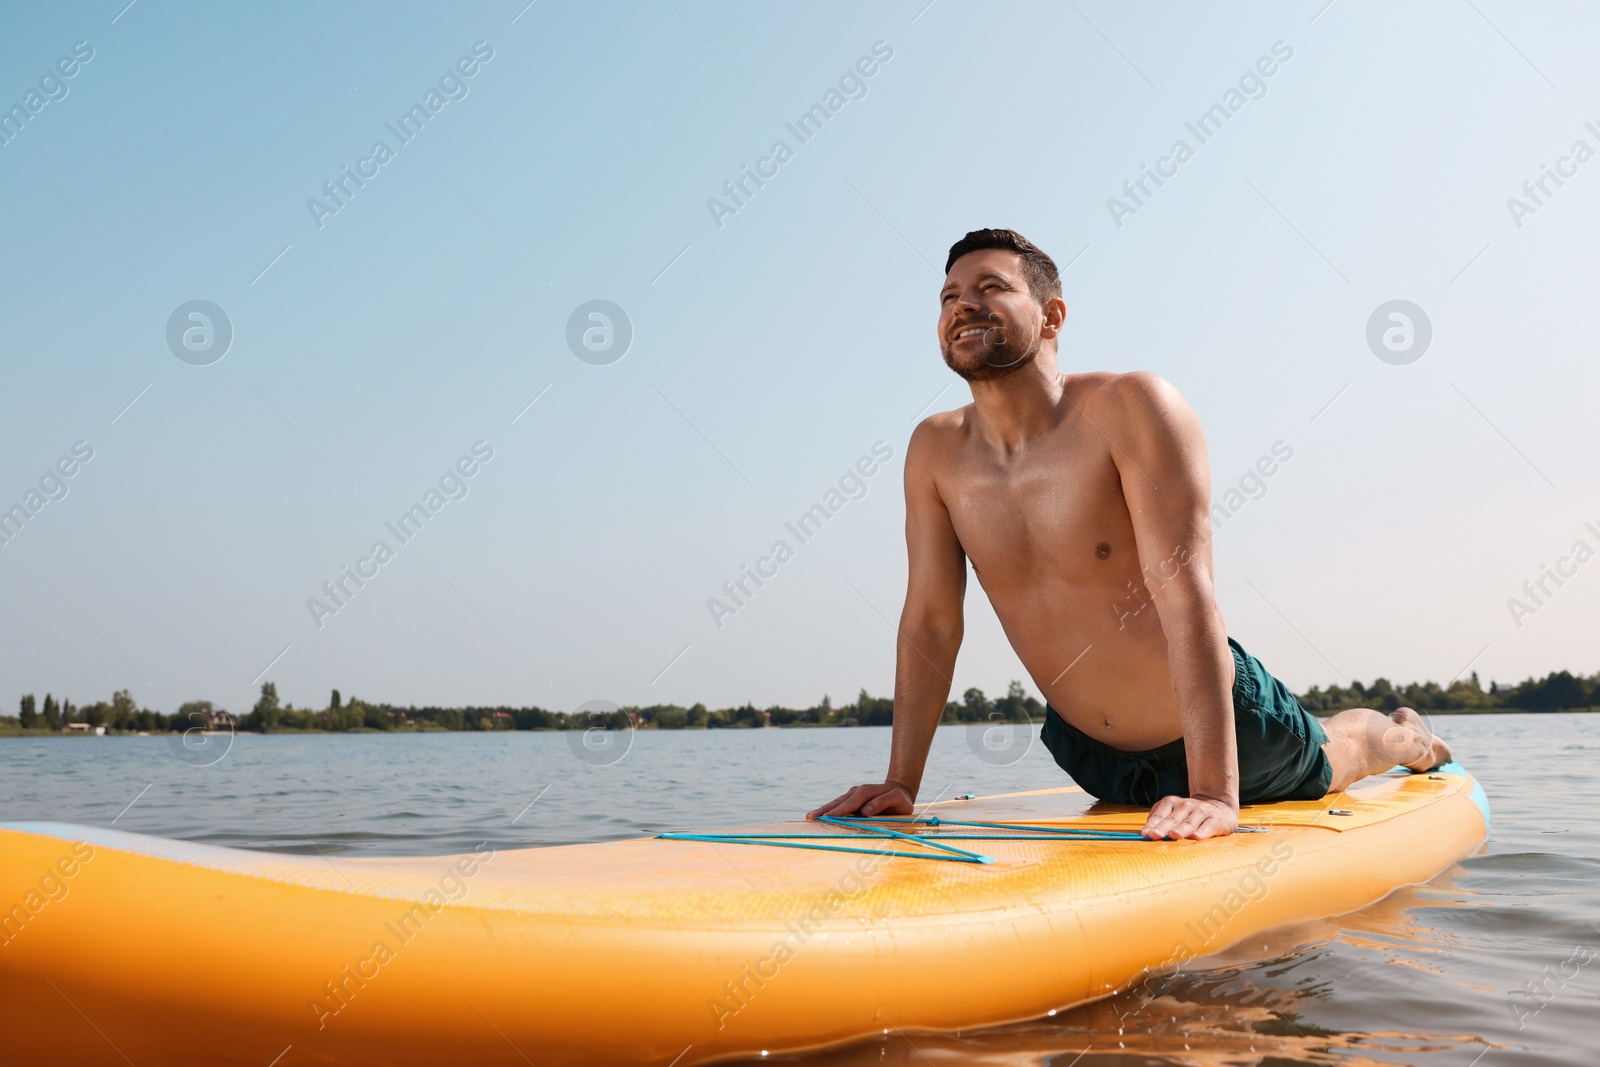 Photo of Man practicing yoga on SUP board on river